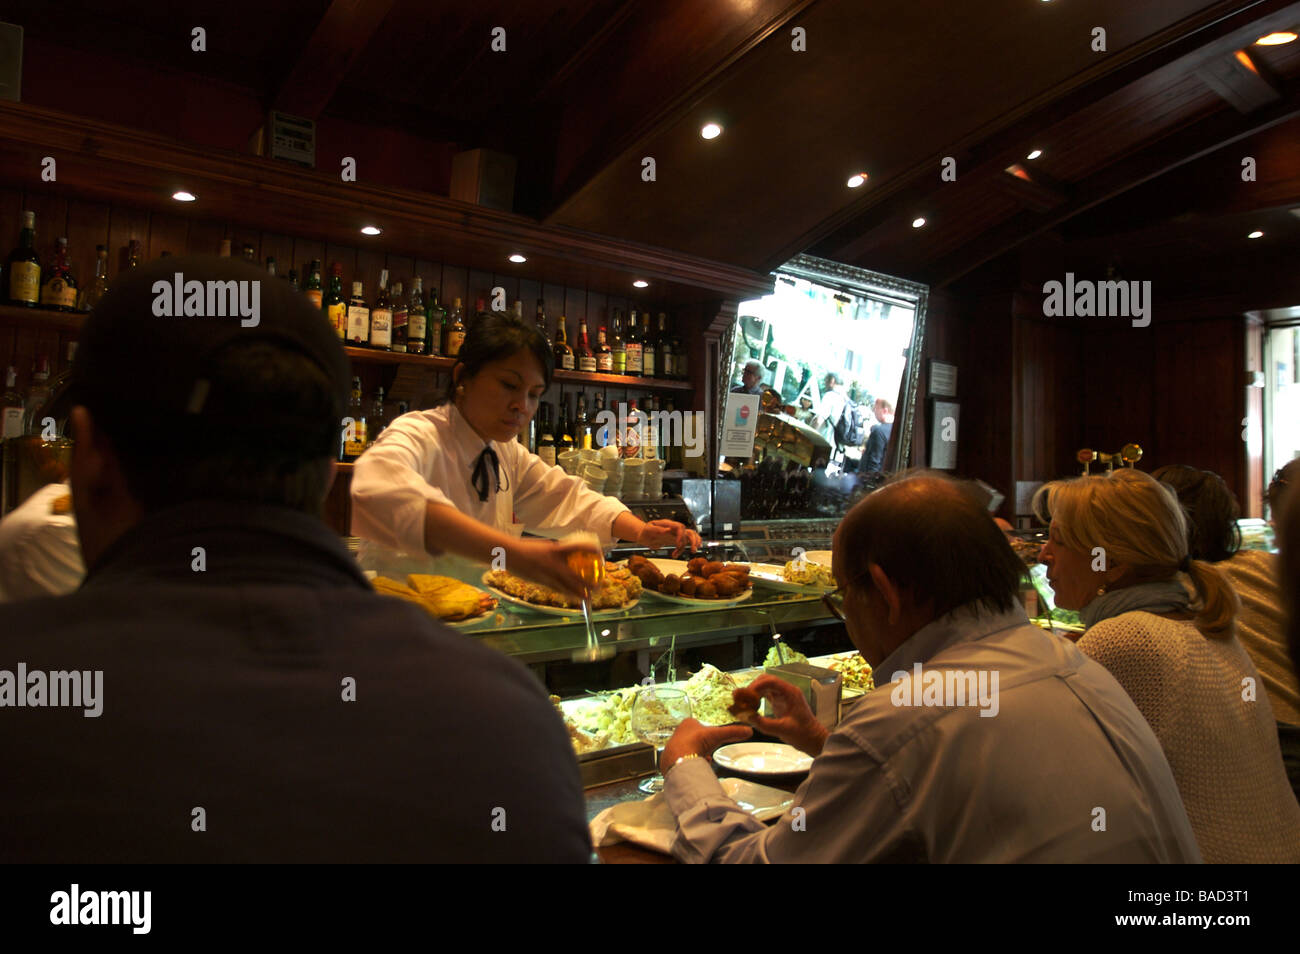 People eating in a Tapas Bar Stock Photo